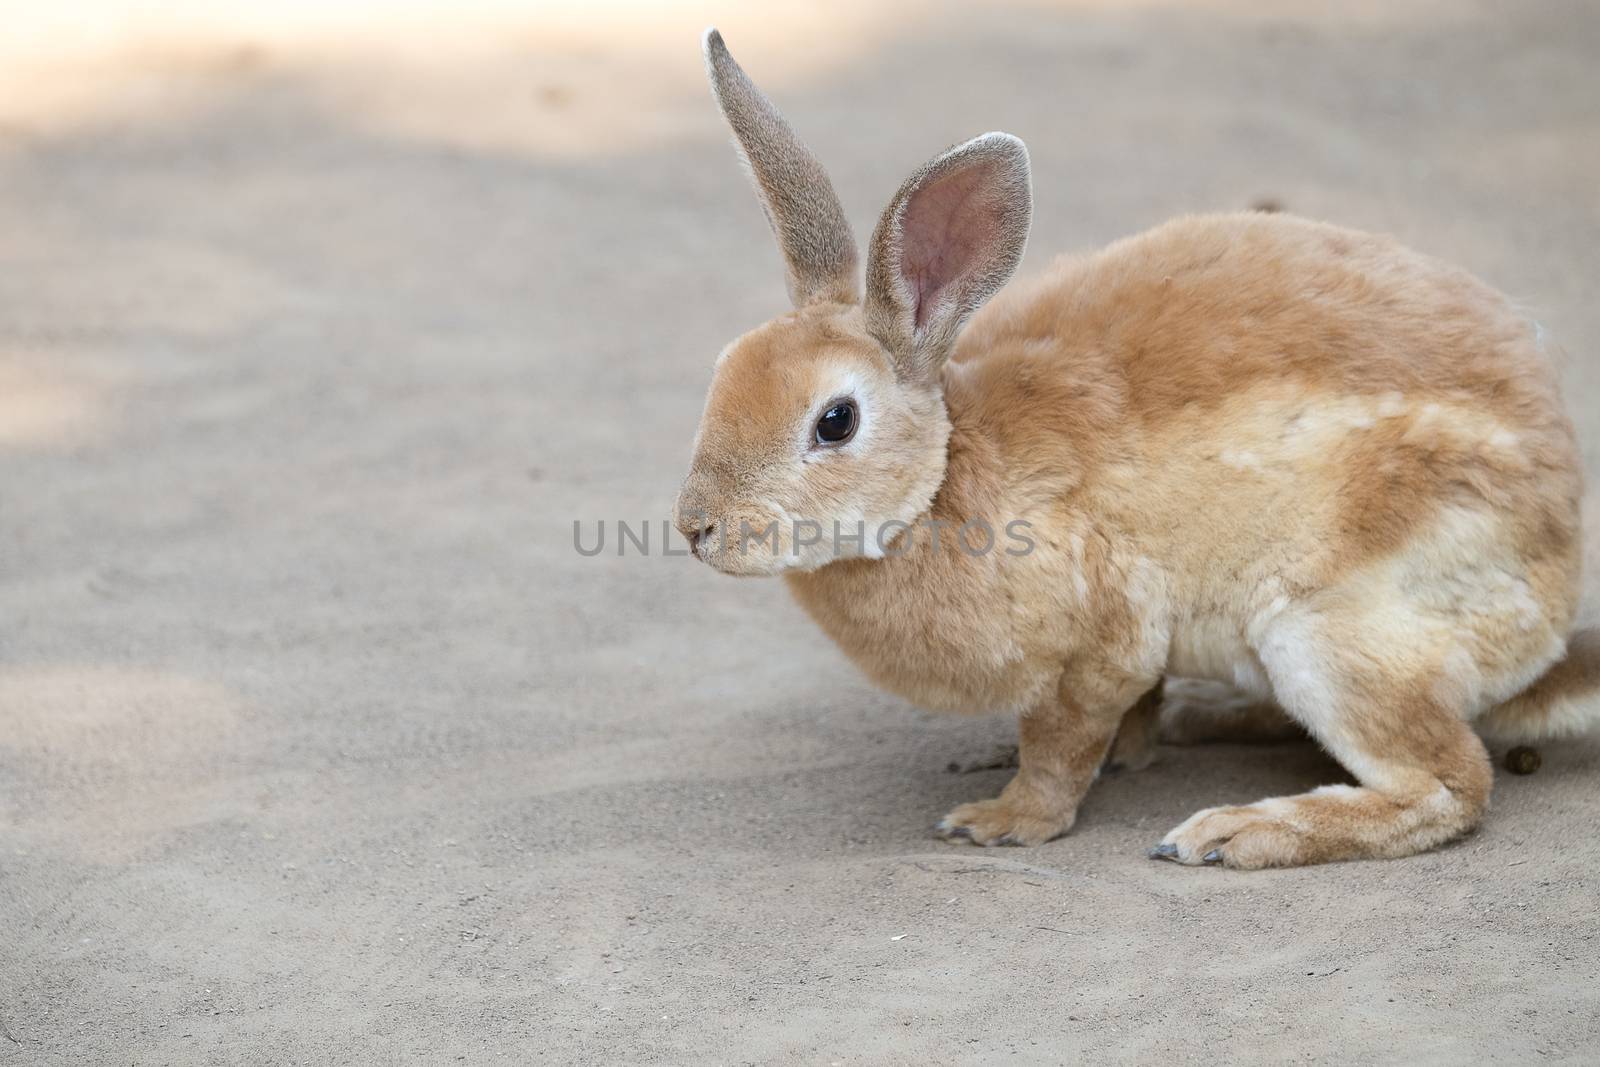 Cute little rabbit with long ears sitting on the ground. Selective focusing.